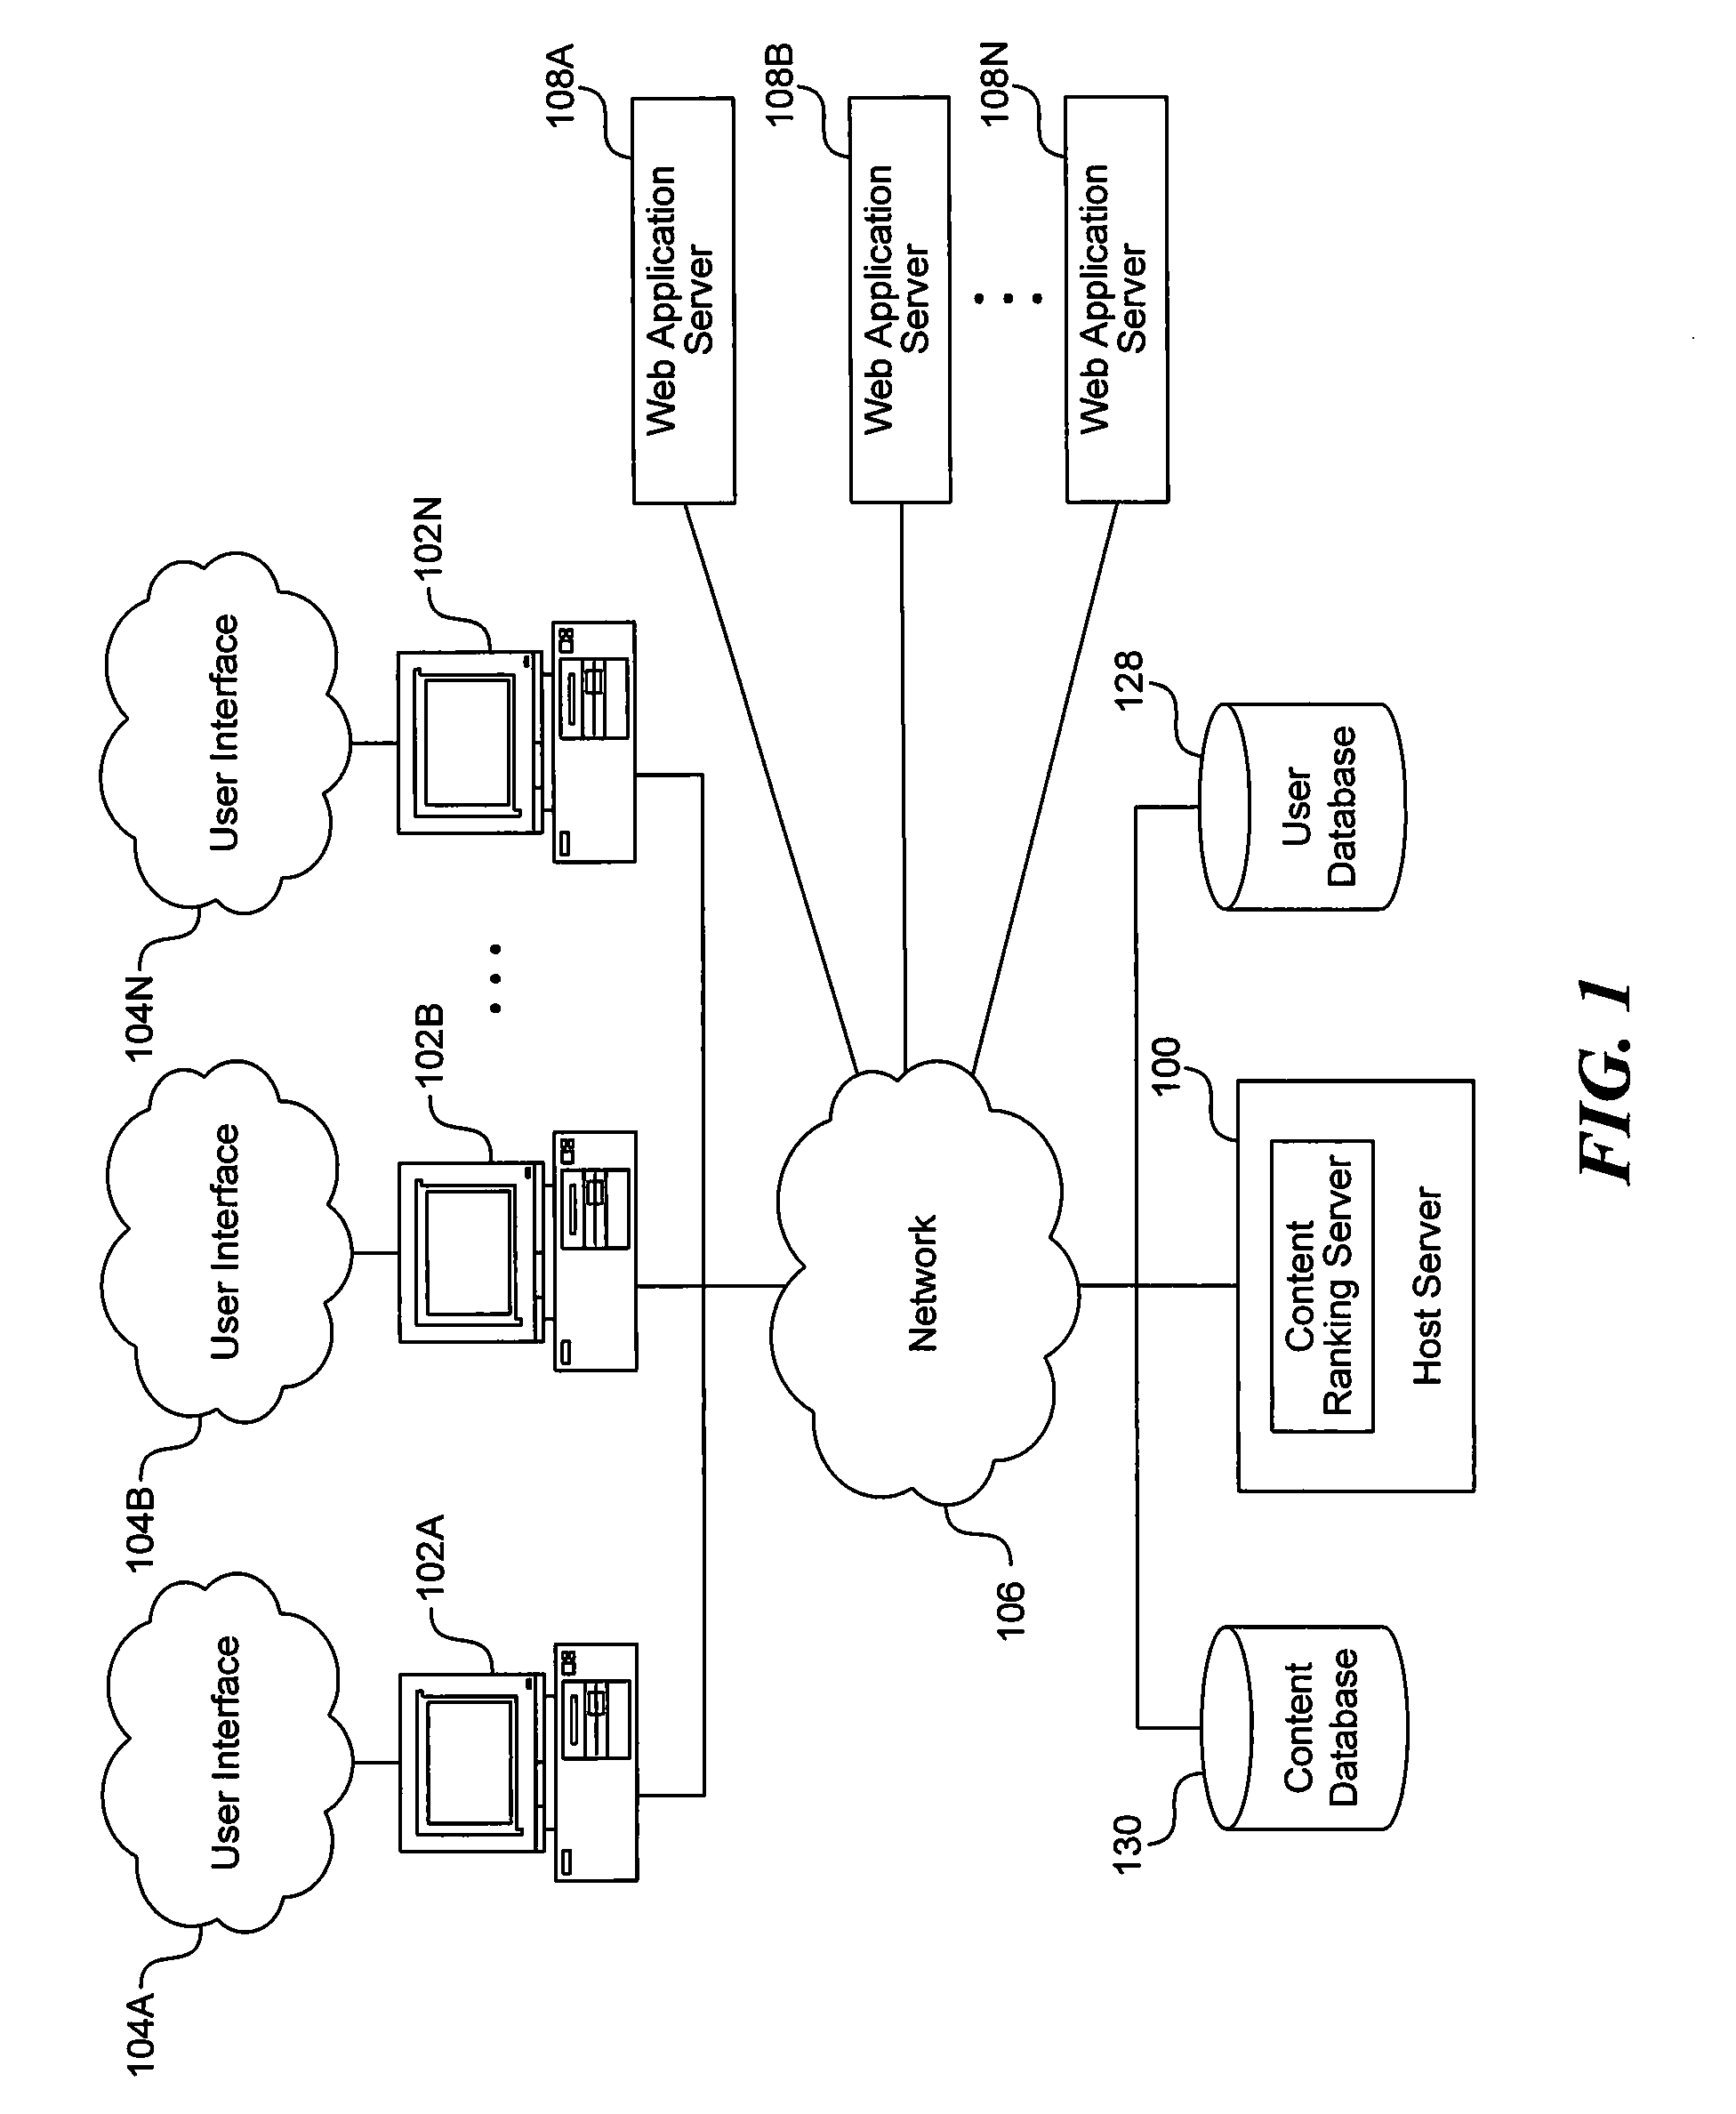 System and method for representation of multiple-identities of a user in a social networking environment